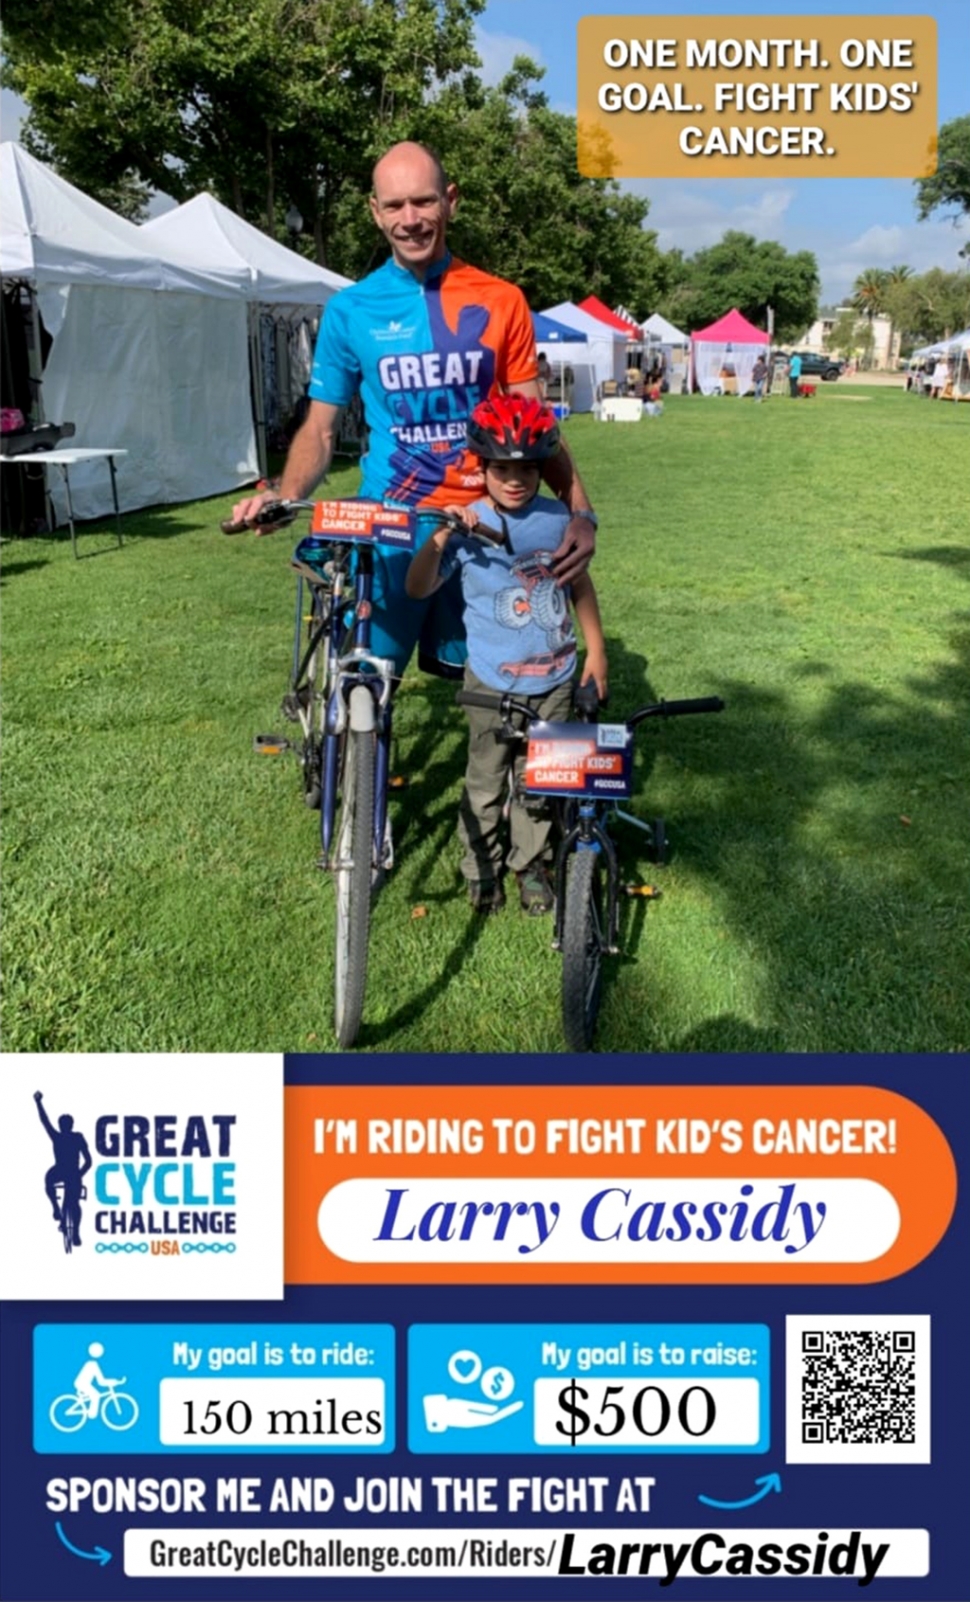 Larry Cassidy of Fillmore will ride 150 miles during the month of September in support of Children’s Cancer Research Fund. If you see Larry riding around town, give him a honk to show your support!